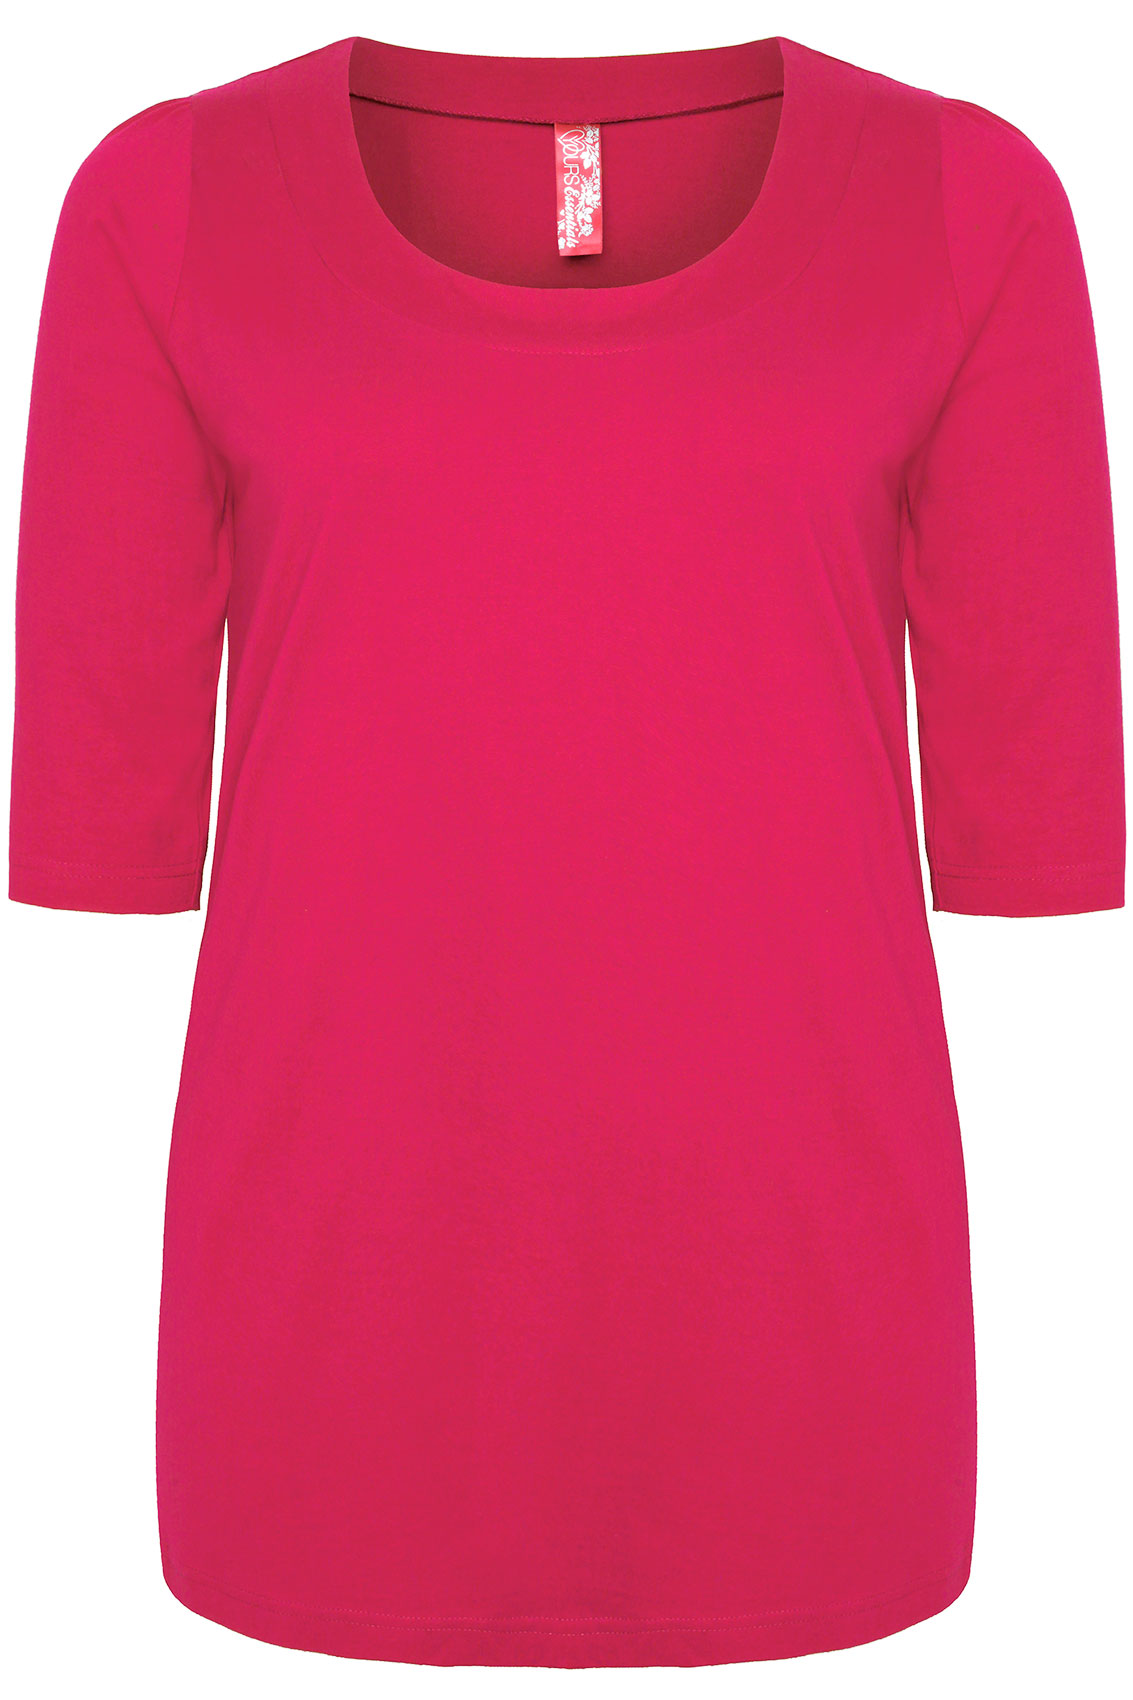 Magenta Band Scoop Neckline Basic T Shirt With 3 4 Sleeves